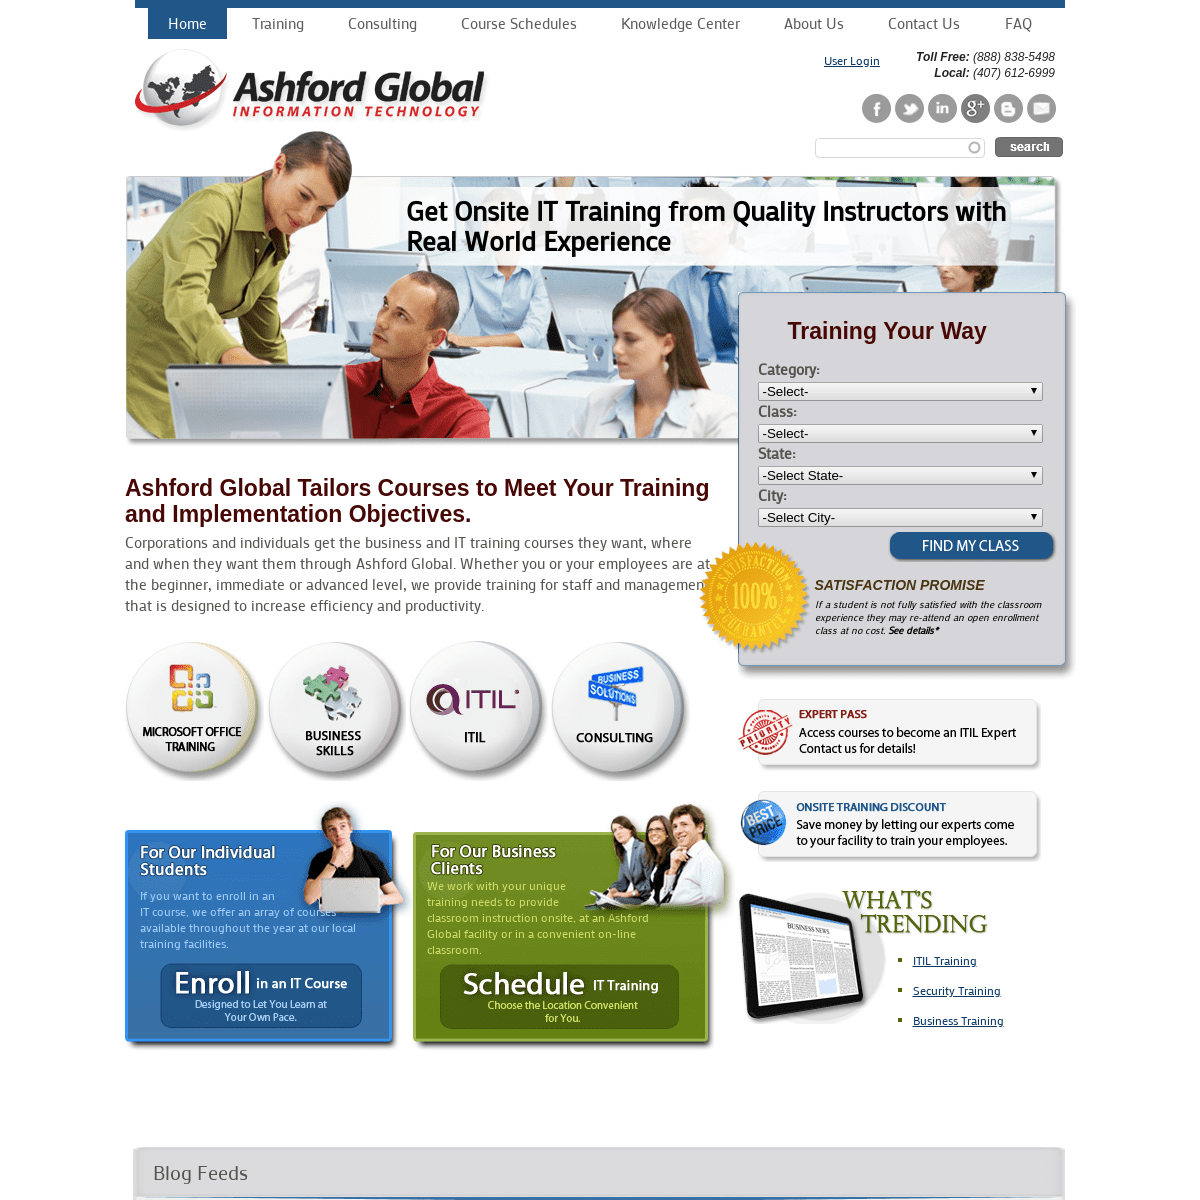 Ashford Global Consulting and Training | Get Onsite Training from Quality Instructors with Real World Experience